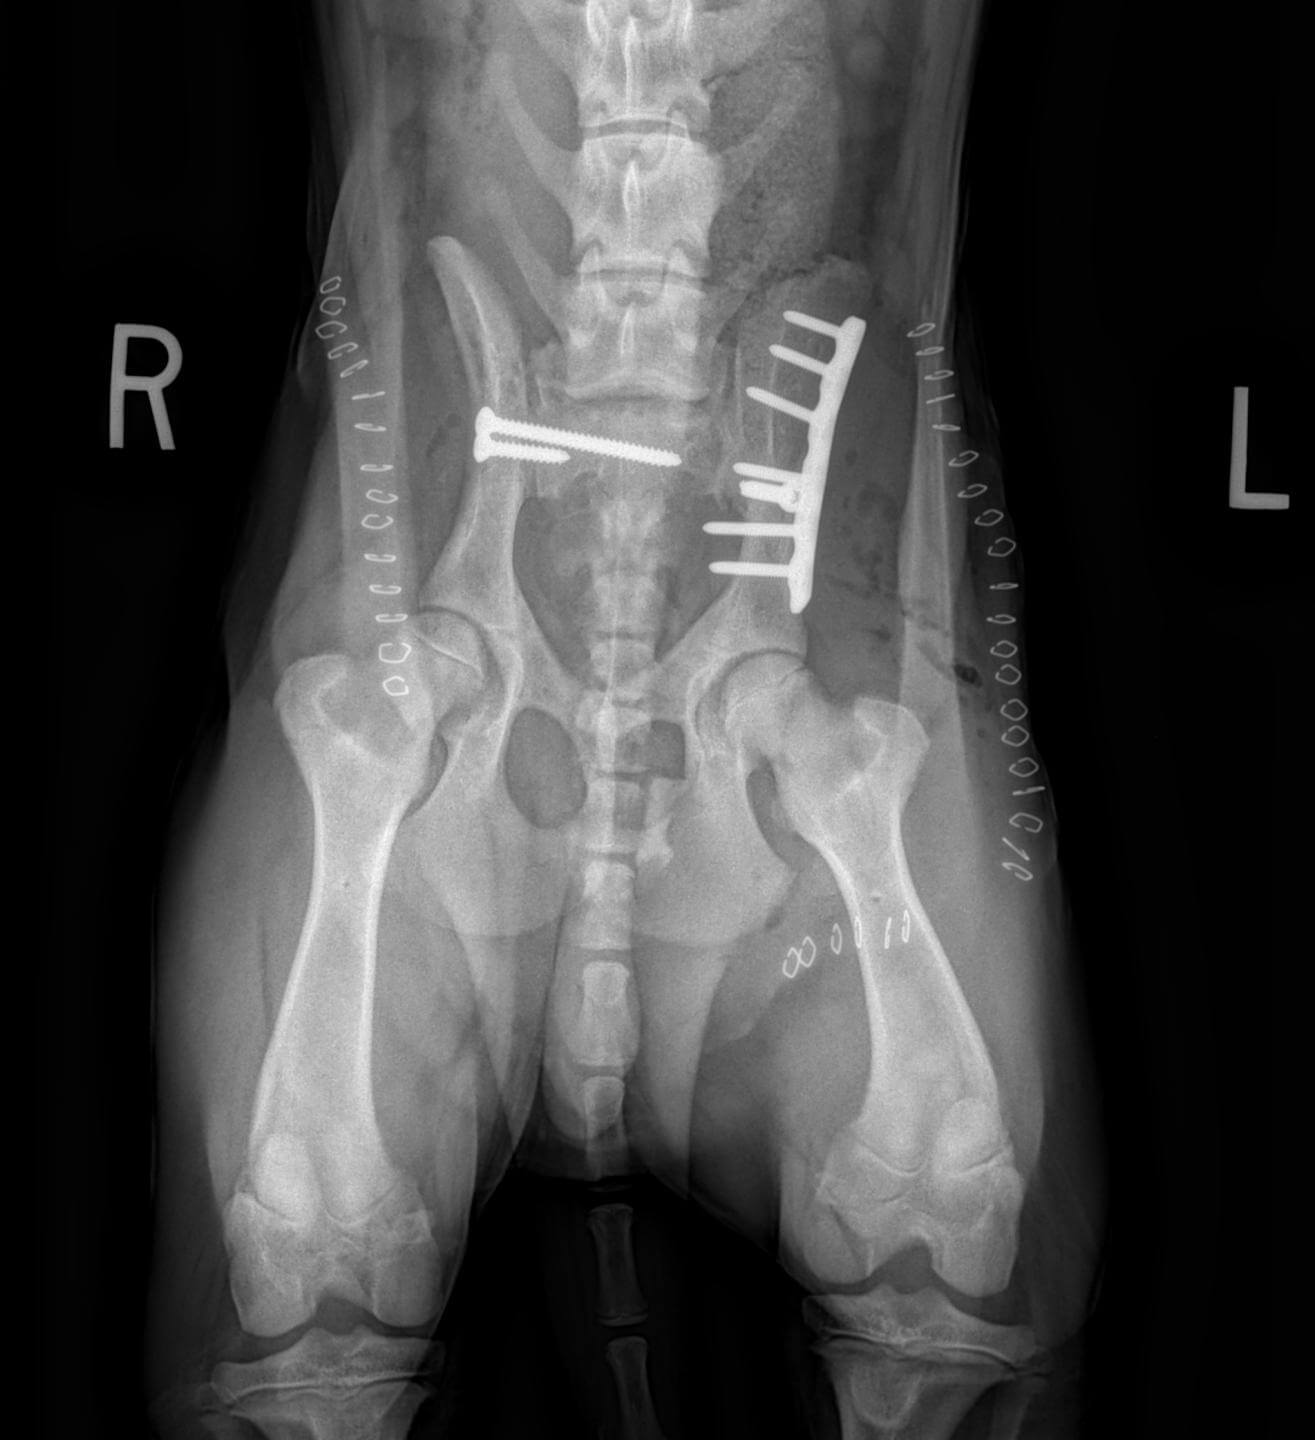 SI luxation repair pelvic fracture plate canine